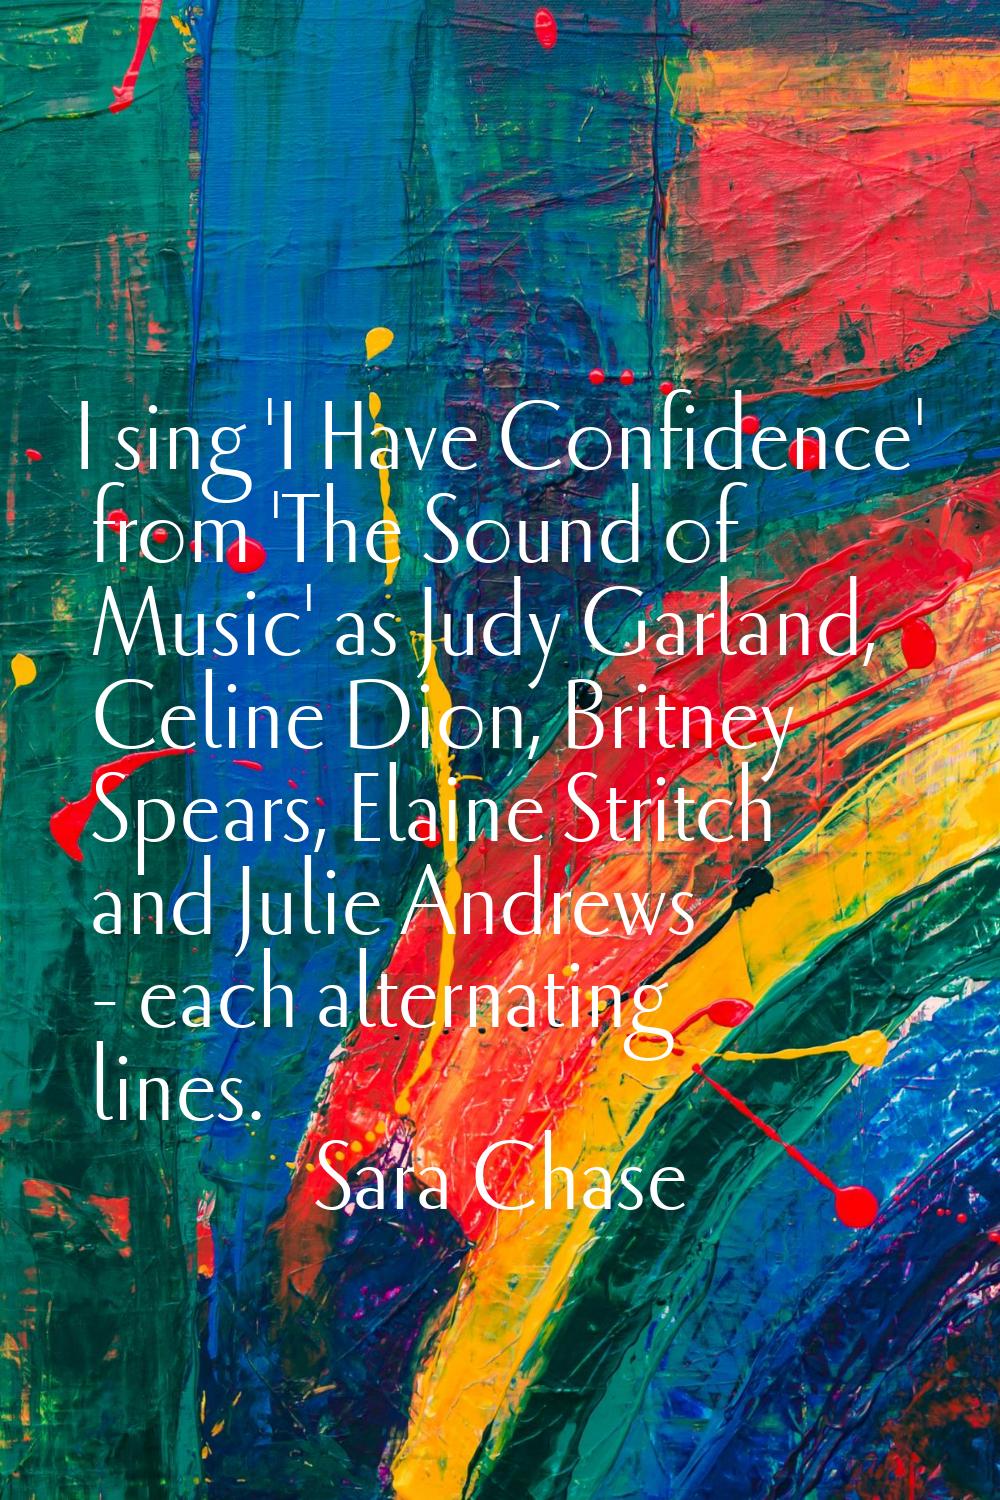 I sing 'I Have Confidence' from 'The Sound of Music' as Judy Garland, Celine Dion, Britney Spears, 